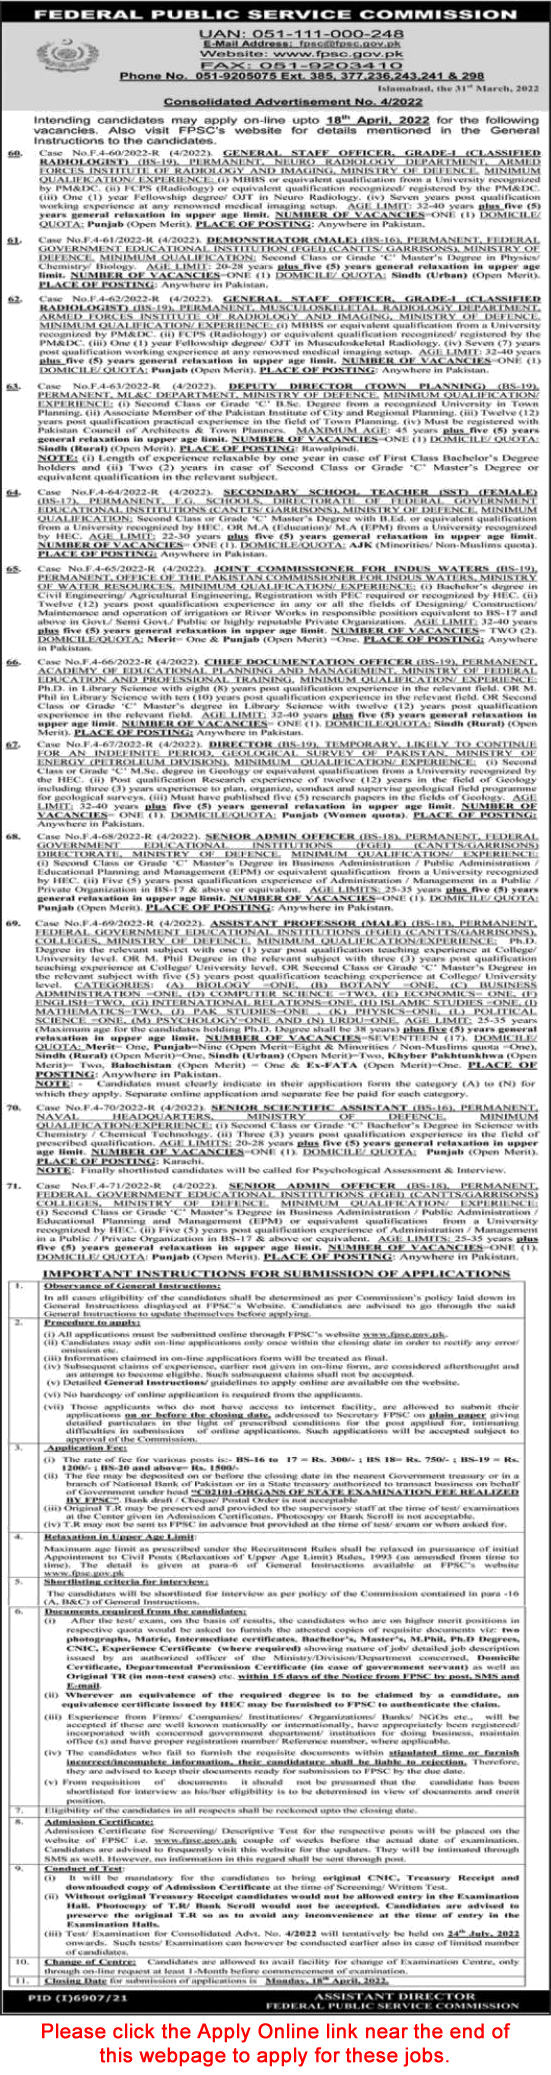 FPSC Jobs April 2022 Apply Online Consolidated Advertisement No 4/2022 04/2022 Latest